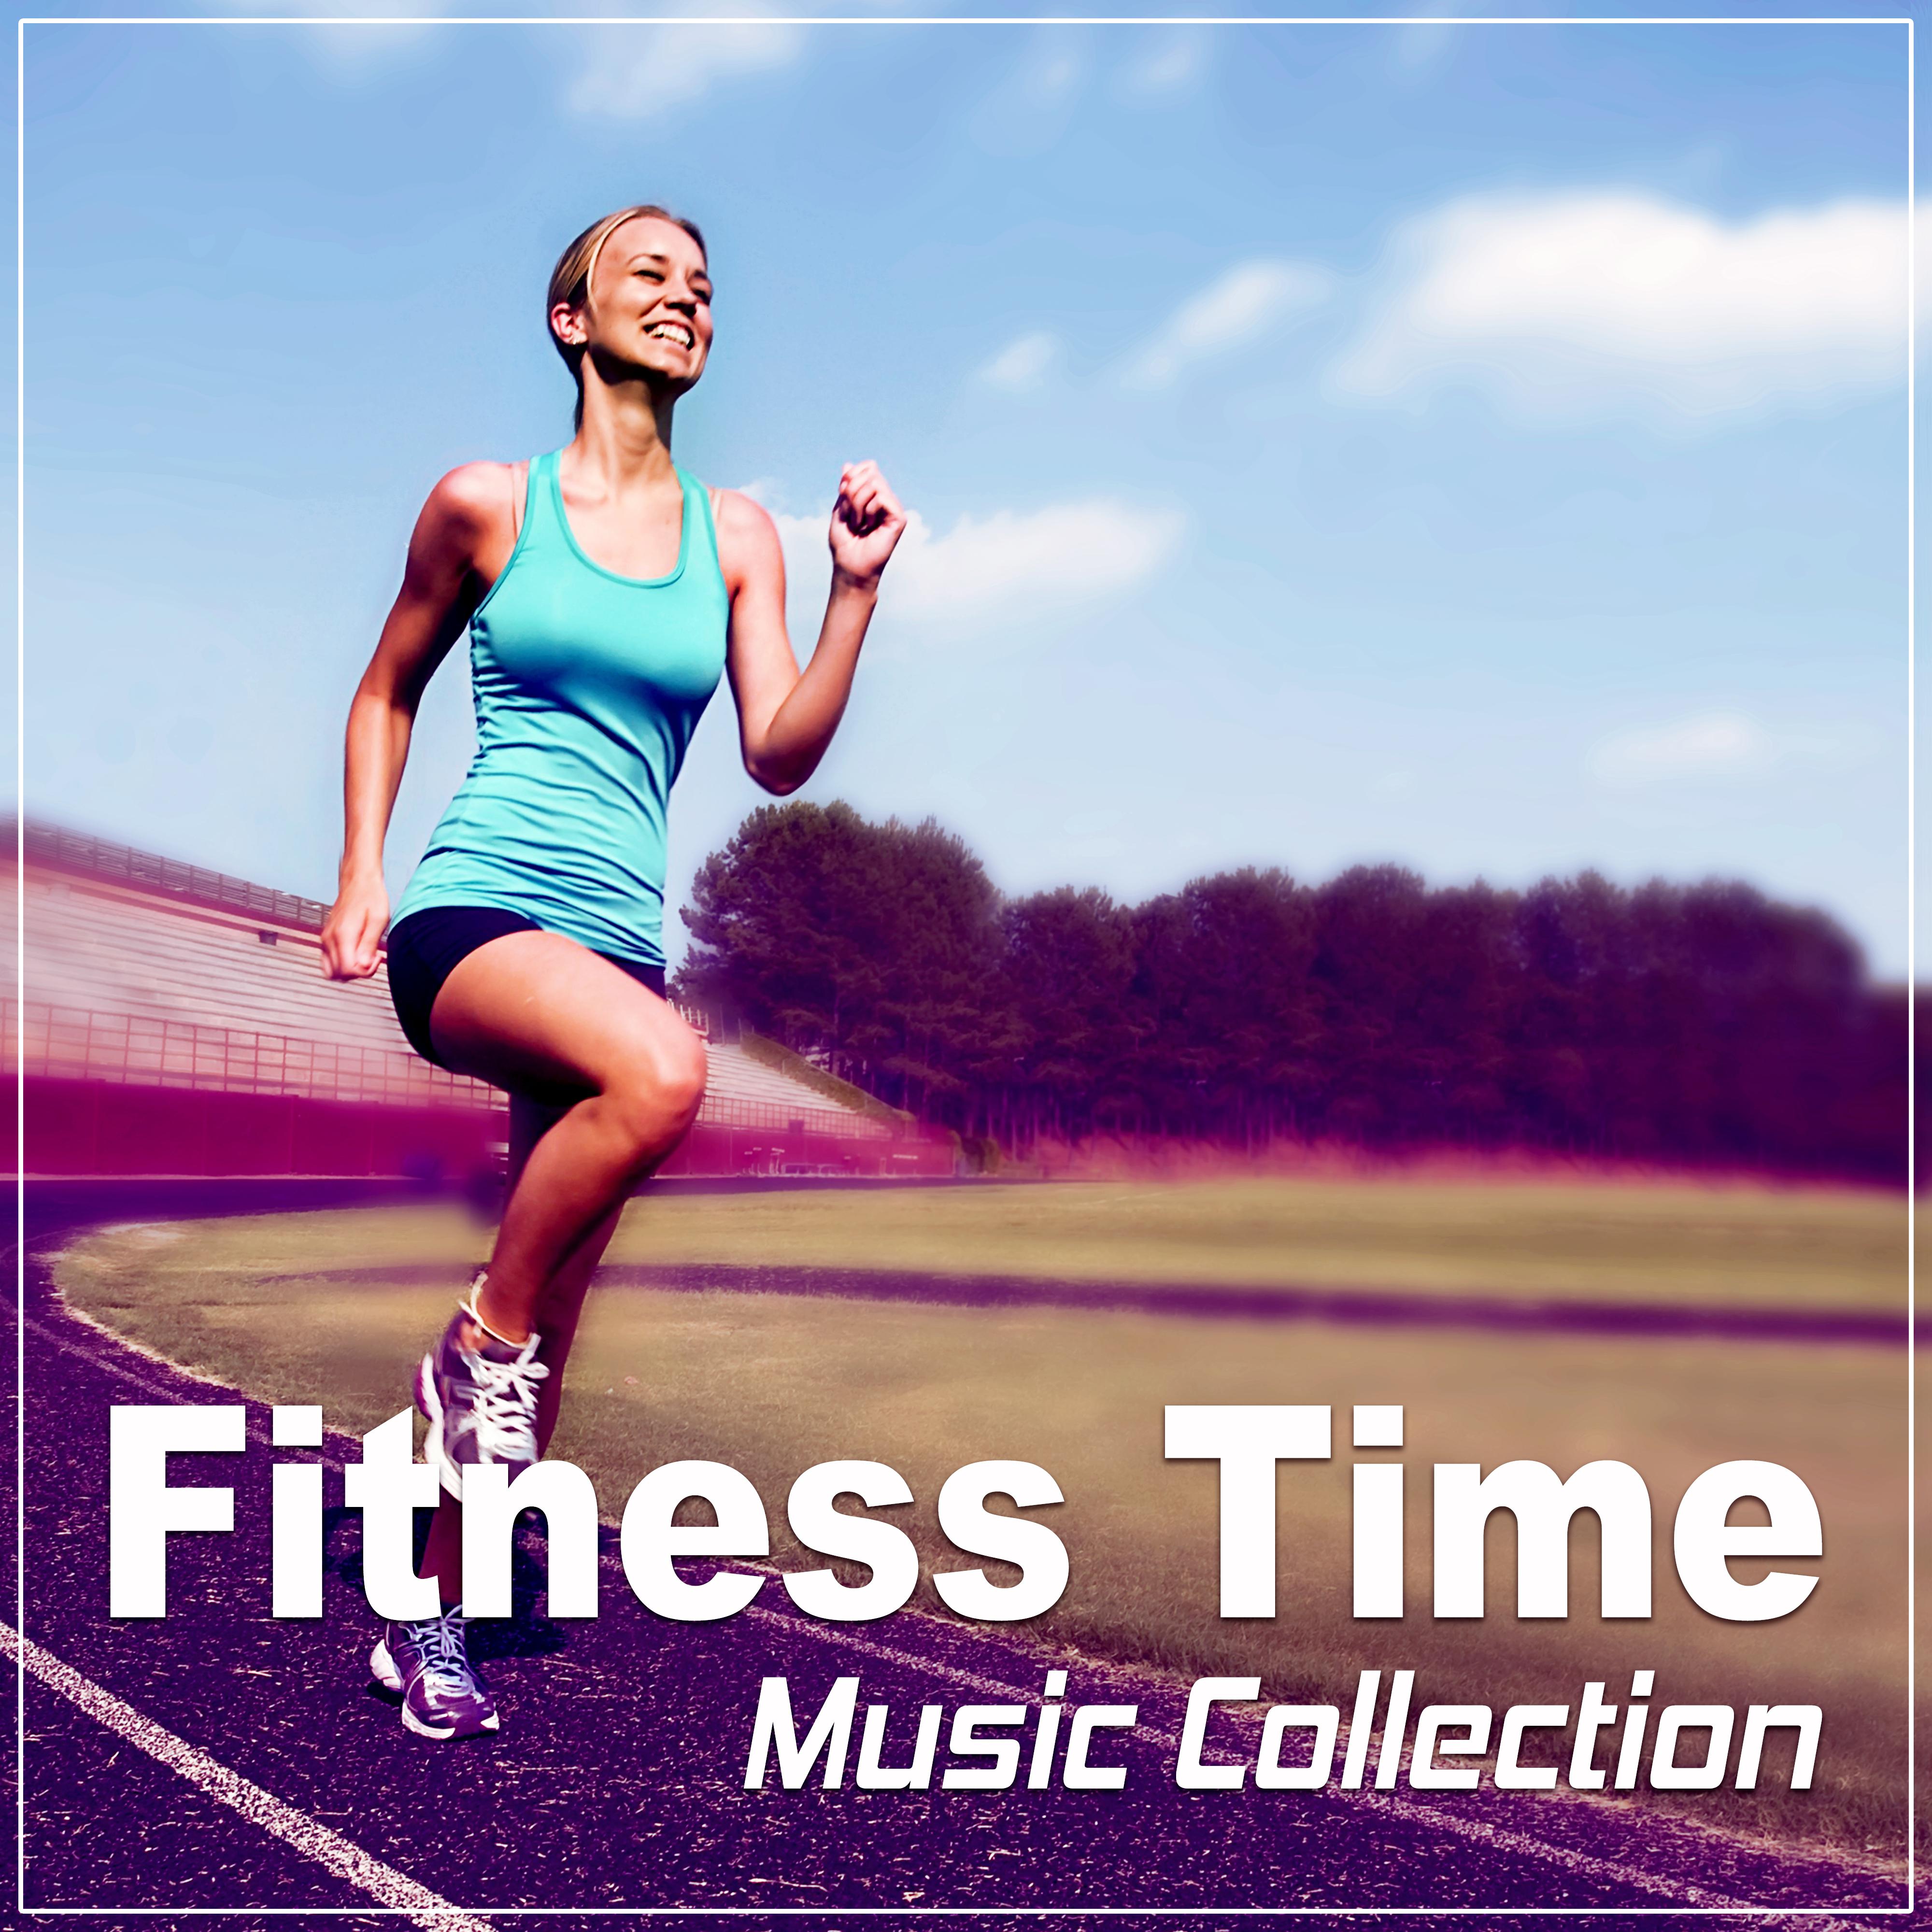 Fitness Time Music Collection  - Motivational Music to Weight Loss, Aerobic, Fitness, Jogging